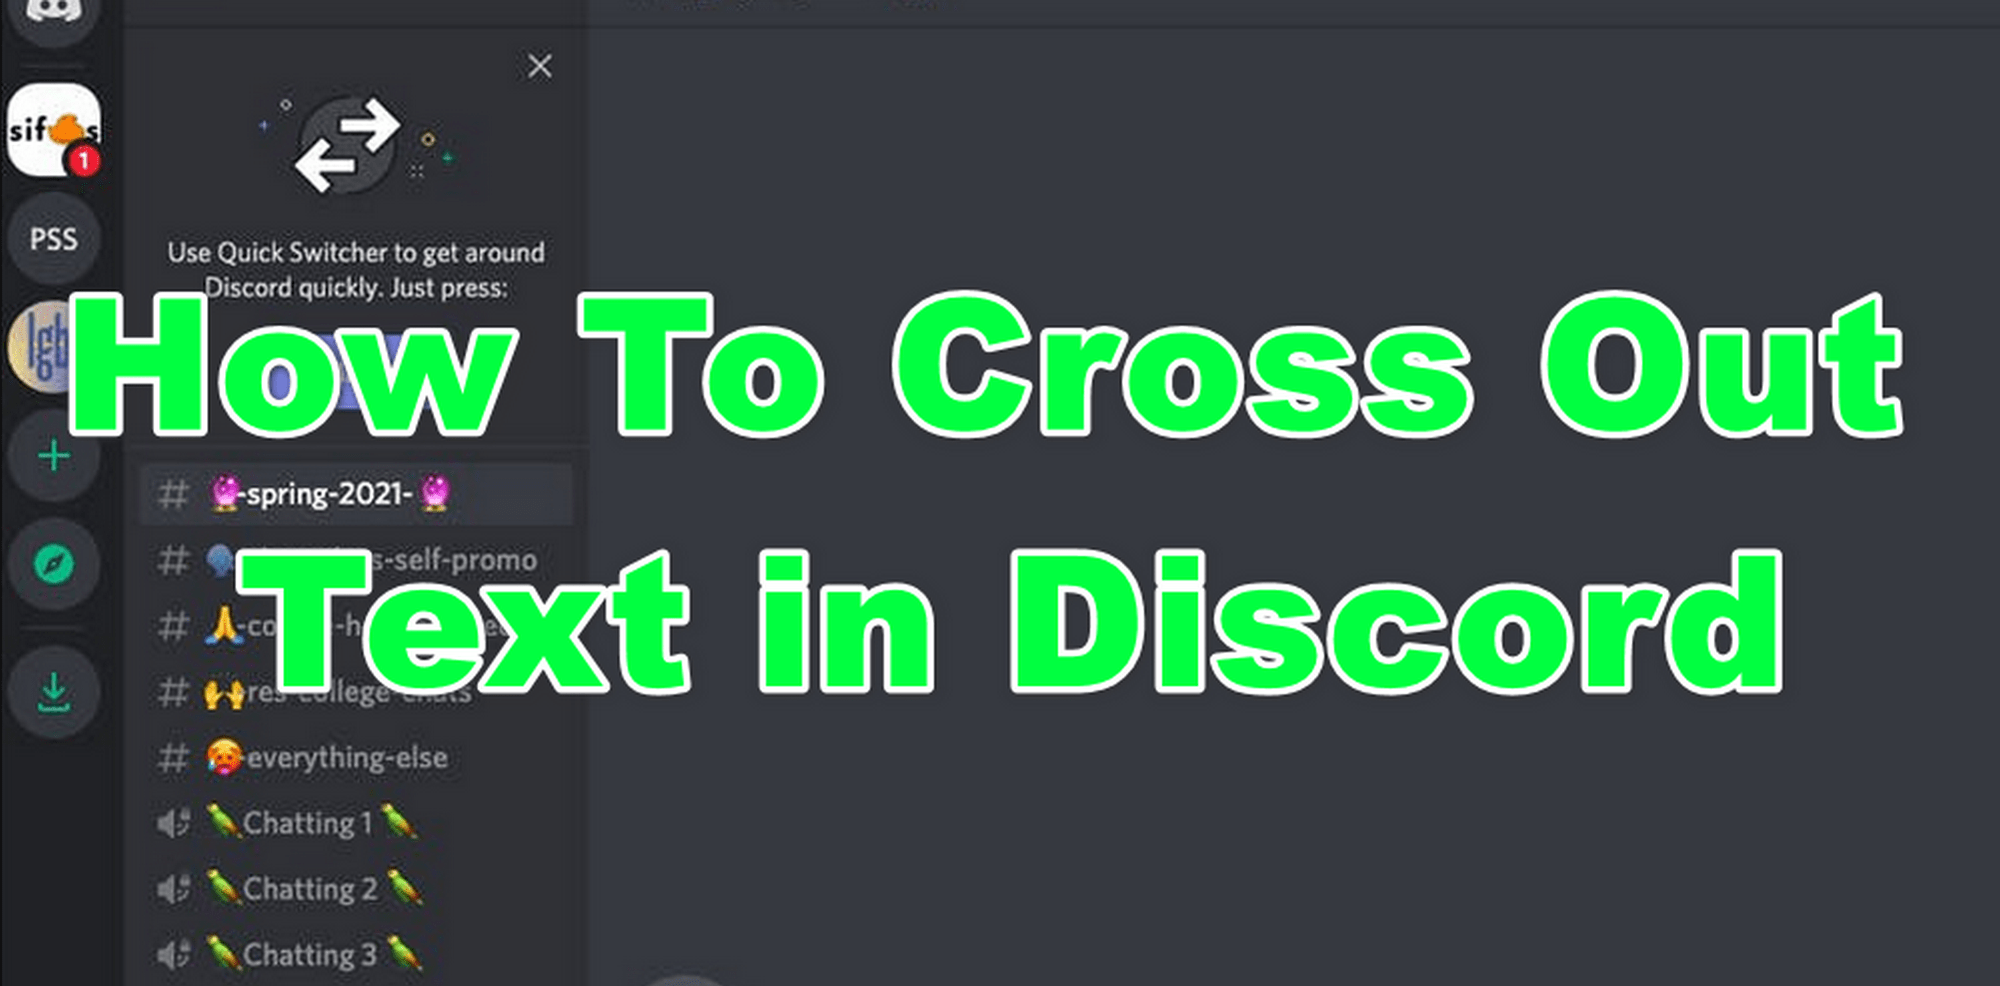 How To Cross Out Text in Discord